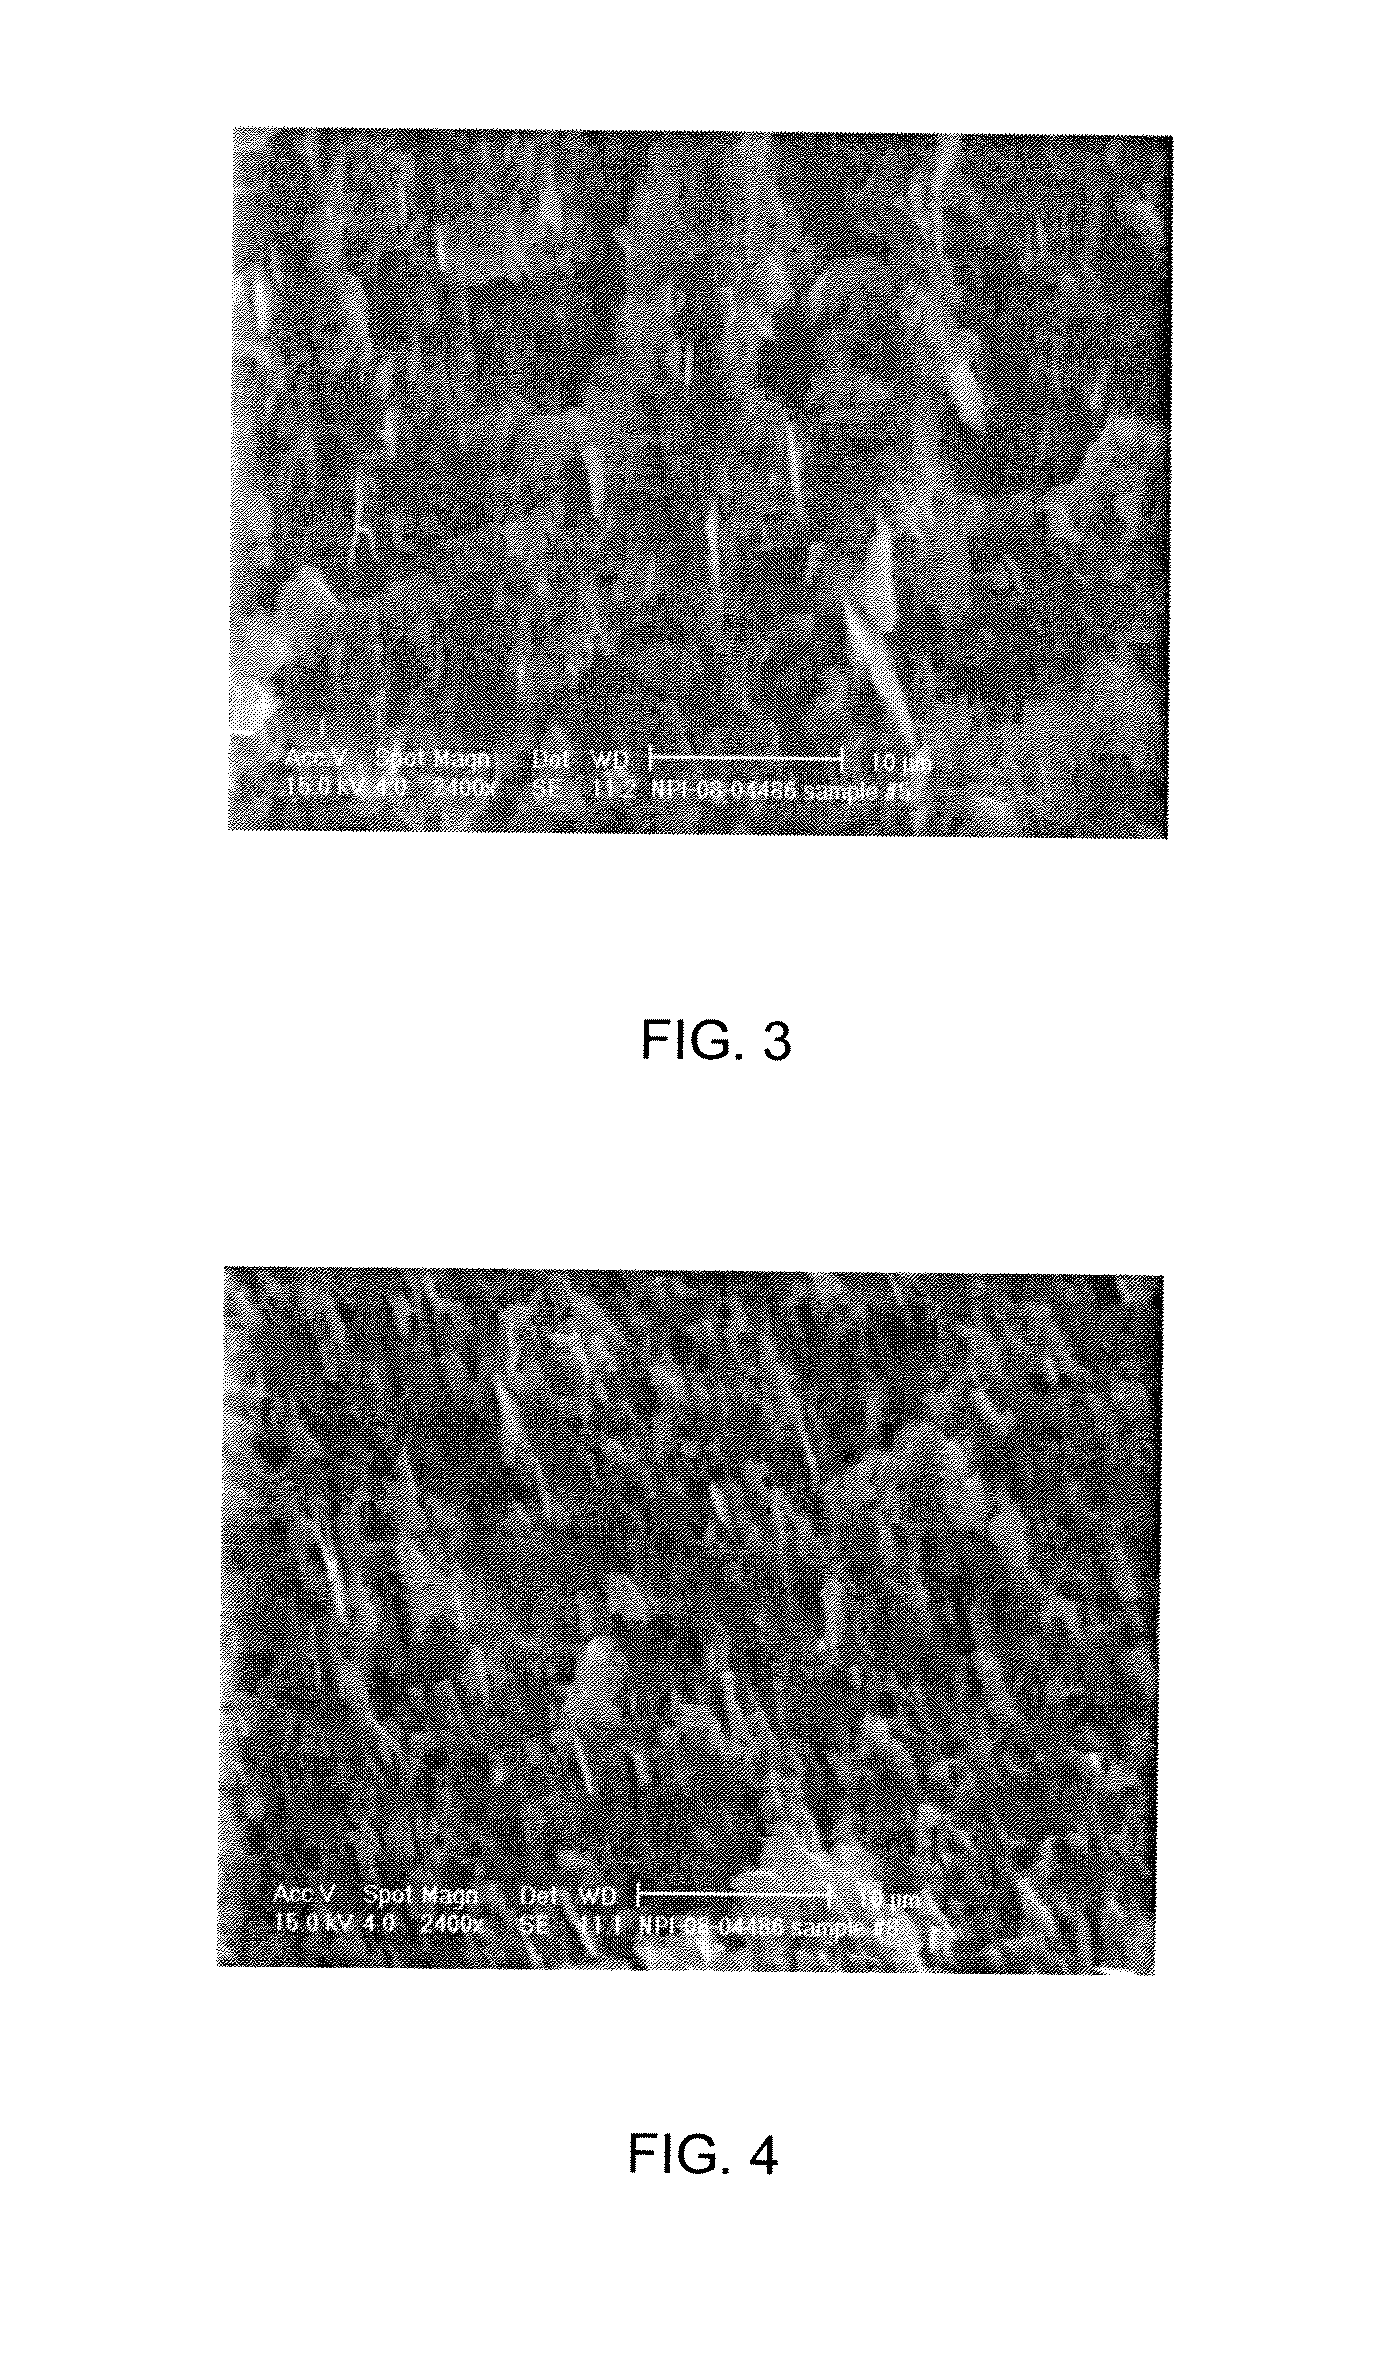 Polycarbonate composition with improved impact strength